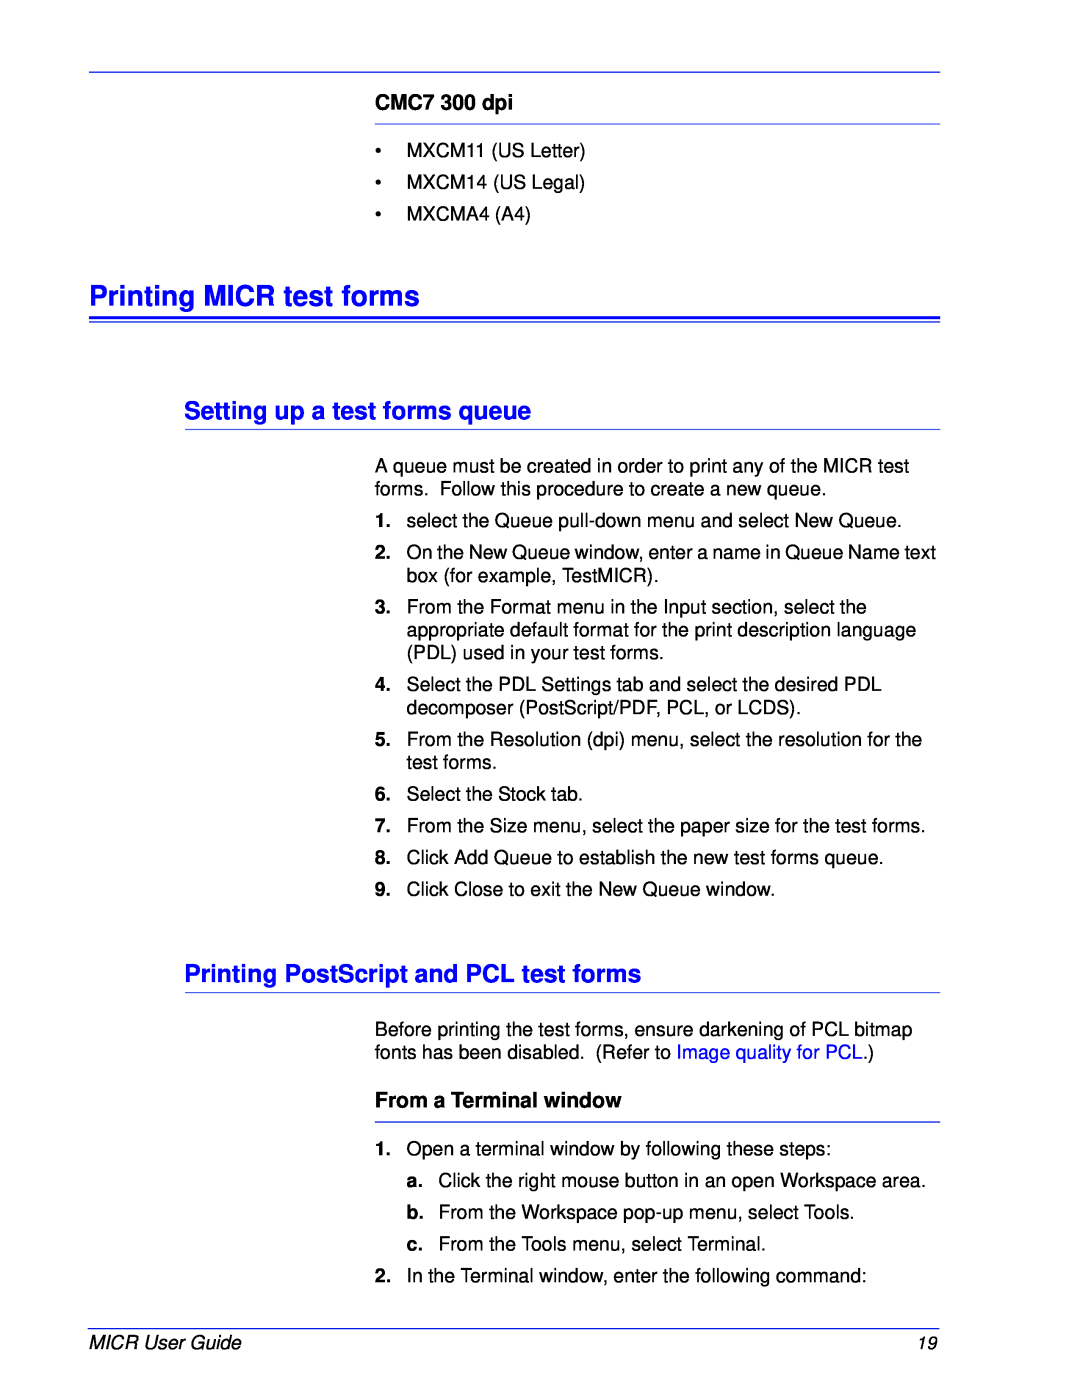 Xerox 701P47409 manual Printing MICR test forms, Setting up a test forms queue, Printing PostScript and PCL test forms 